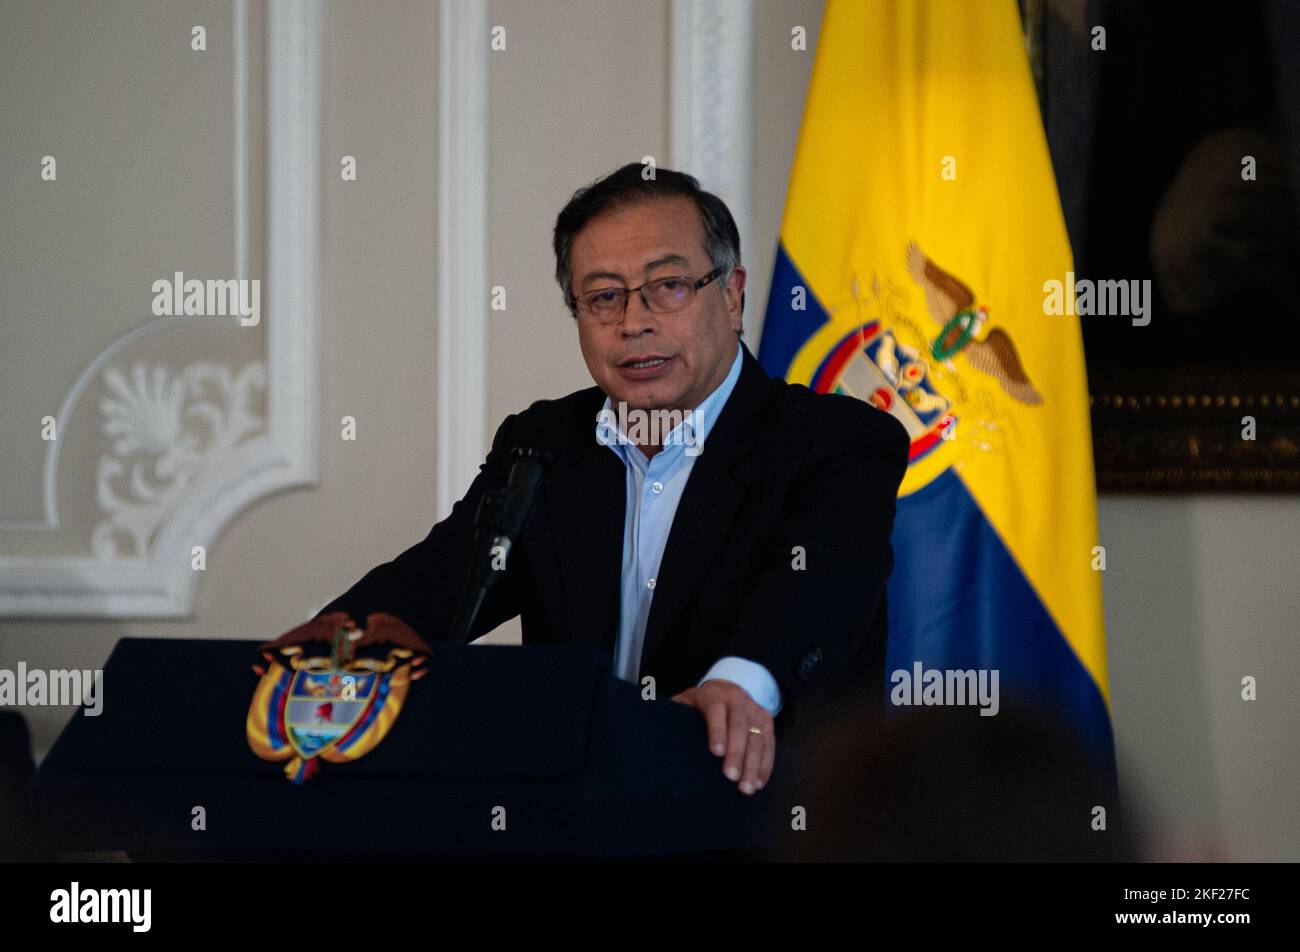 Bogota, Colombia. 15th Nov, 2022. Colombian president Gustavo Petro speaks during a press conference about the first 100 days of his government in office, in Bogota, Colombia on November 15, 2022. Photo by: Chepa Beltran/Long Visual Press Credit: Long Visual Press/Alamy Live News Stock Photo